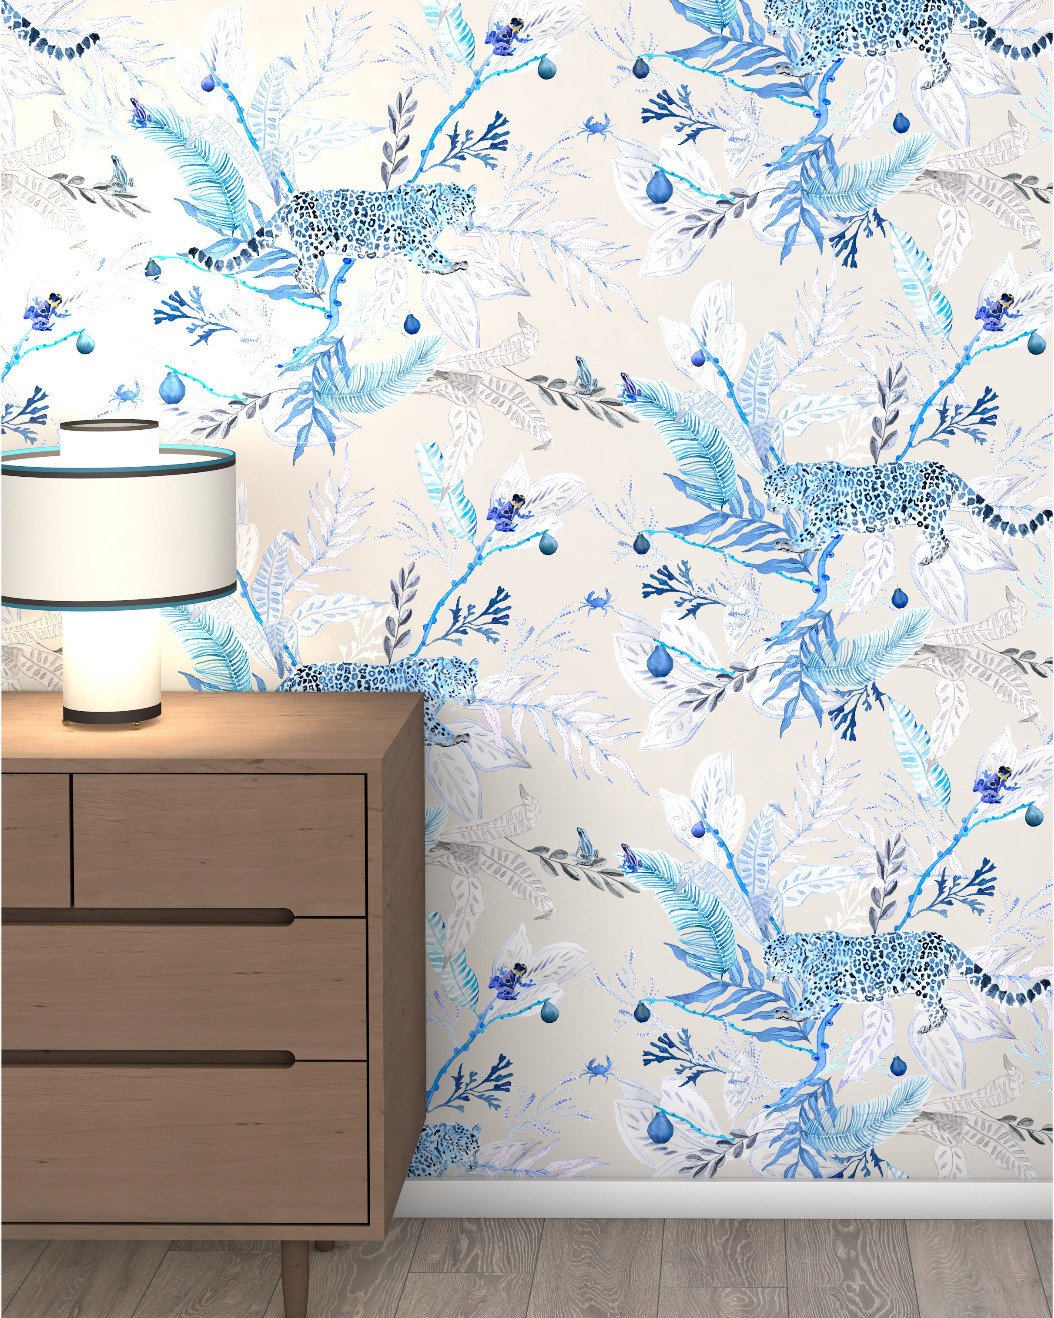 🐆 Our iconic jaguar in vibrant shades of blue on a light beige- 
The design of the Orilla wallpaper is an invitation to travel and navigate to an imaginary coast where magical jaguars play hide and seek with colourful frogs and crabs. An invitation 